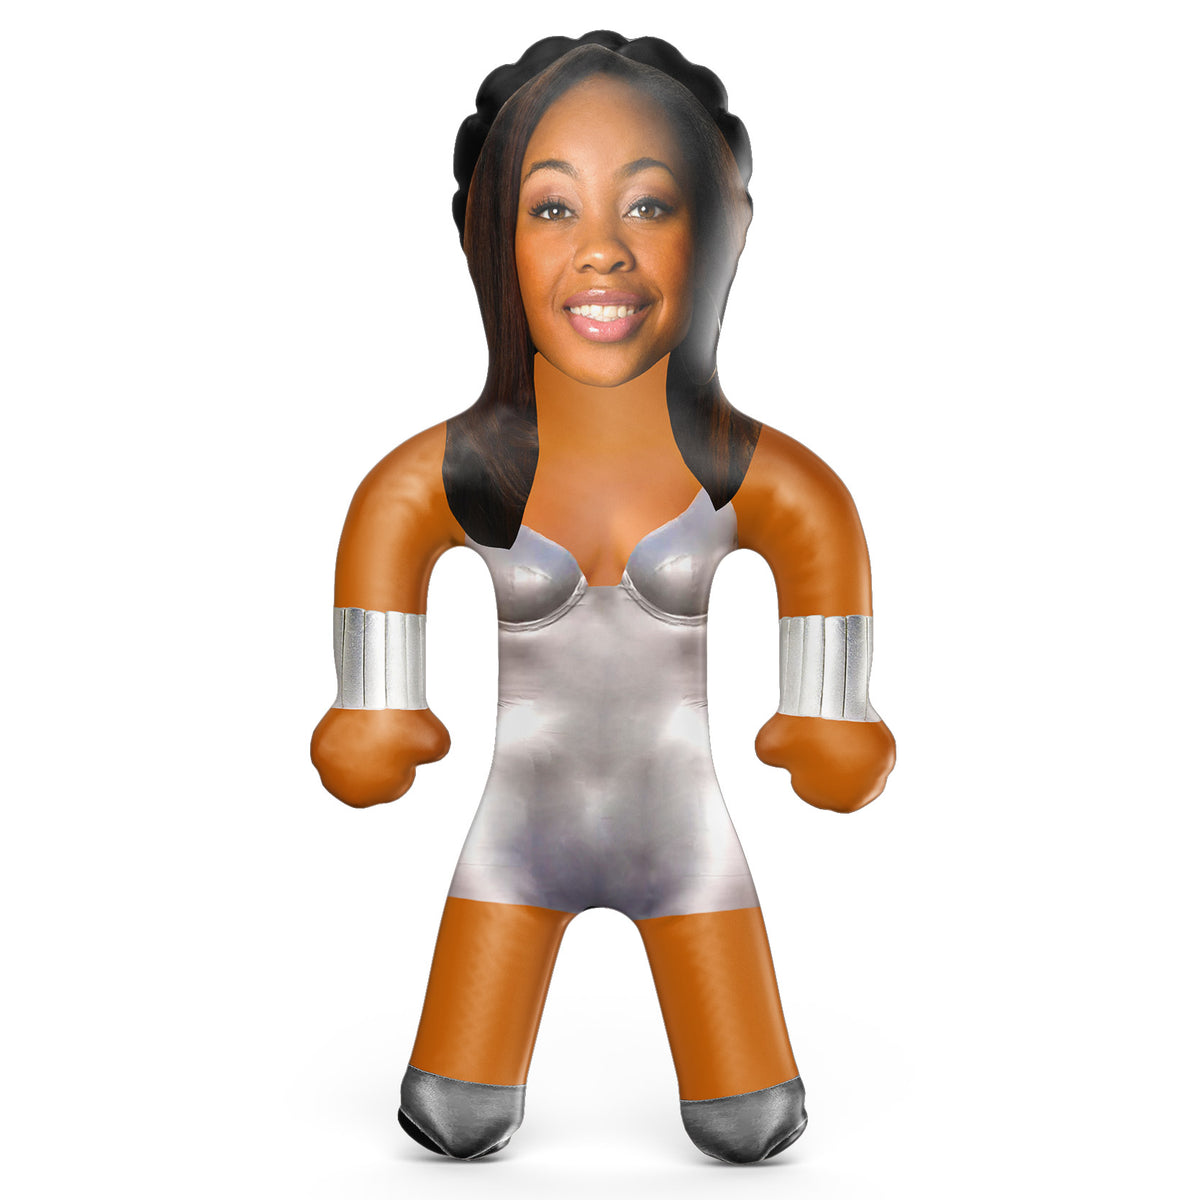 Influencer 5 Inflatable Doll - Influencer Blow Up Doll